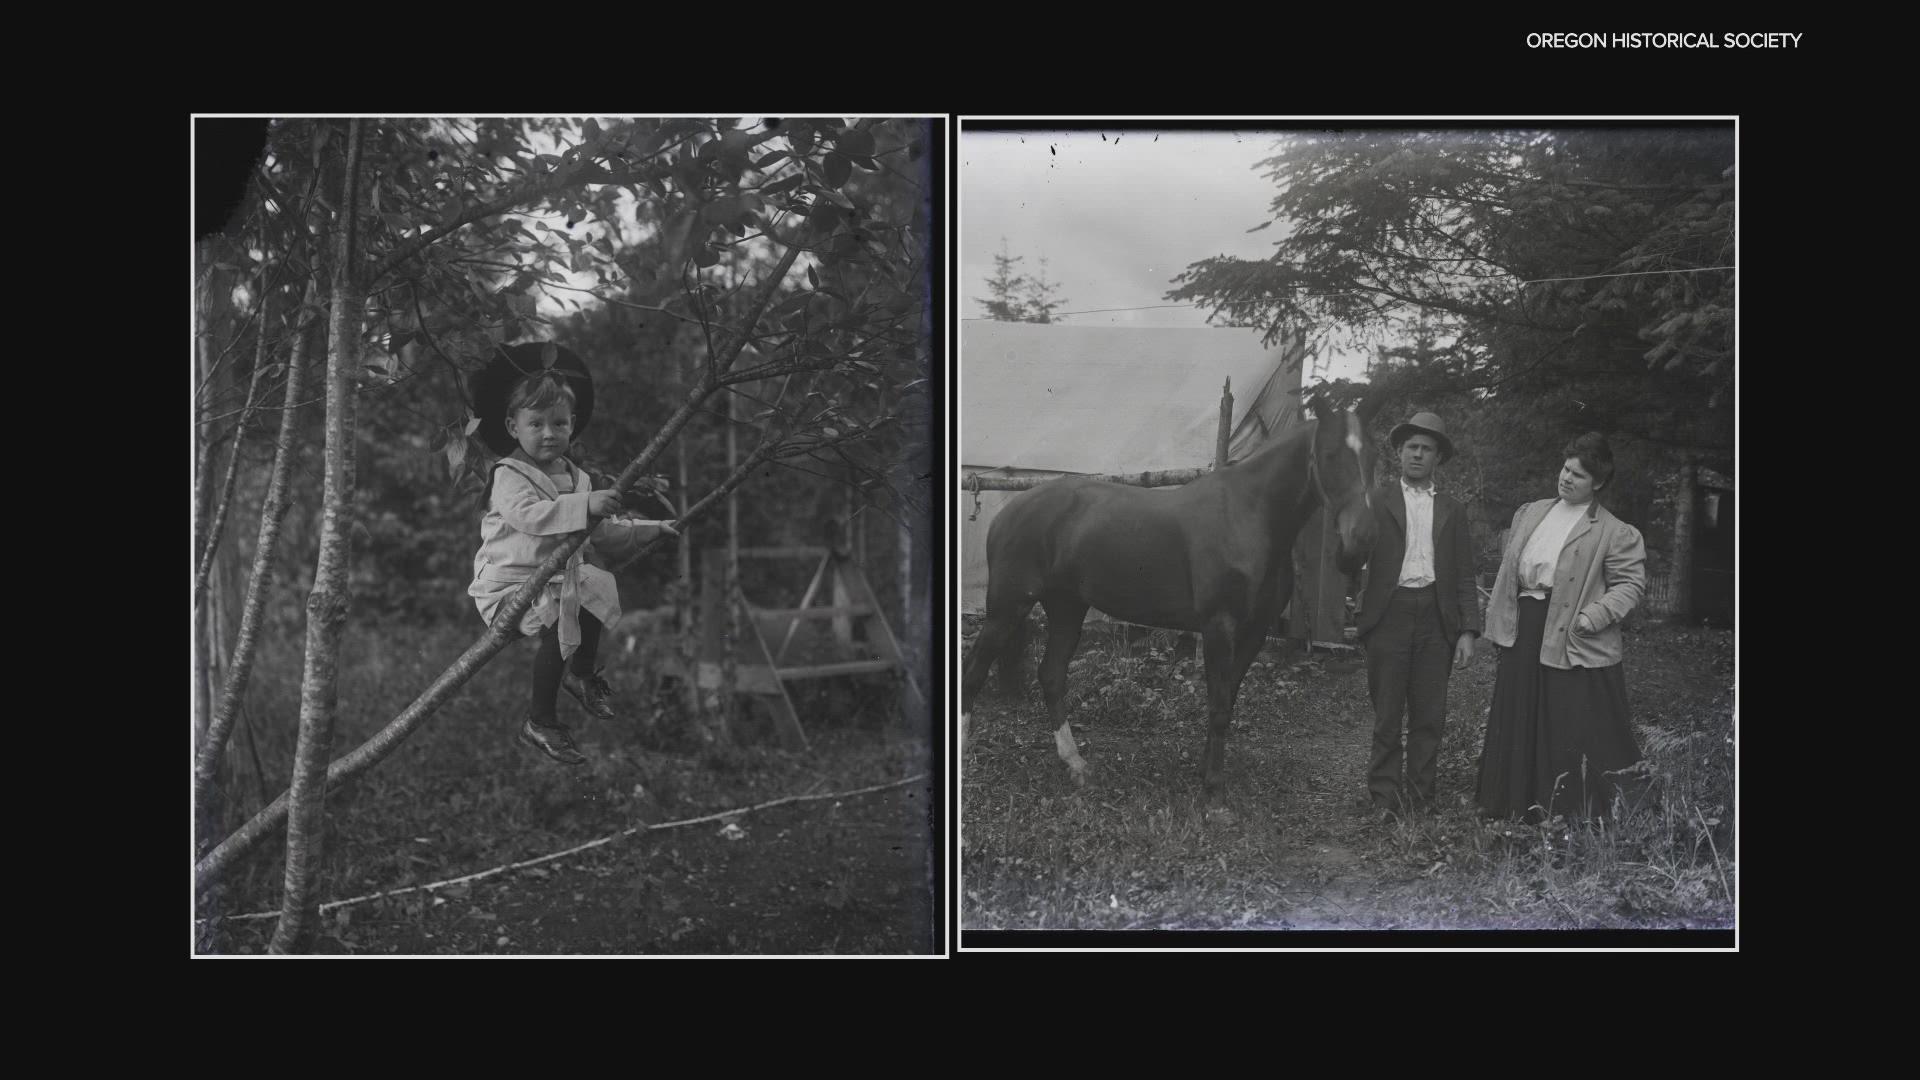 The Oregon Historical Society digitized a collection of 88 glass negatives discovered in a Northeast Portland home, now available for all to see.